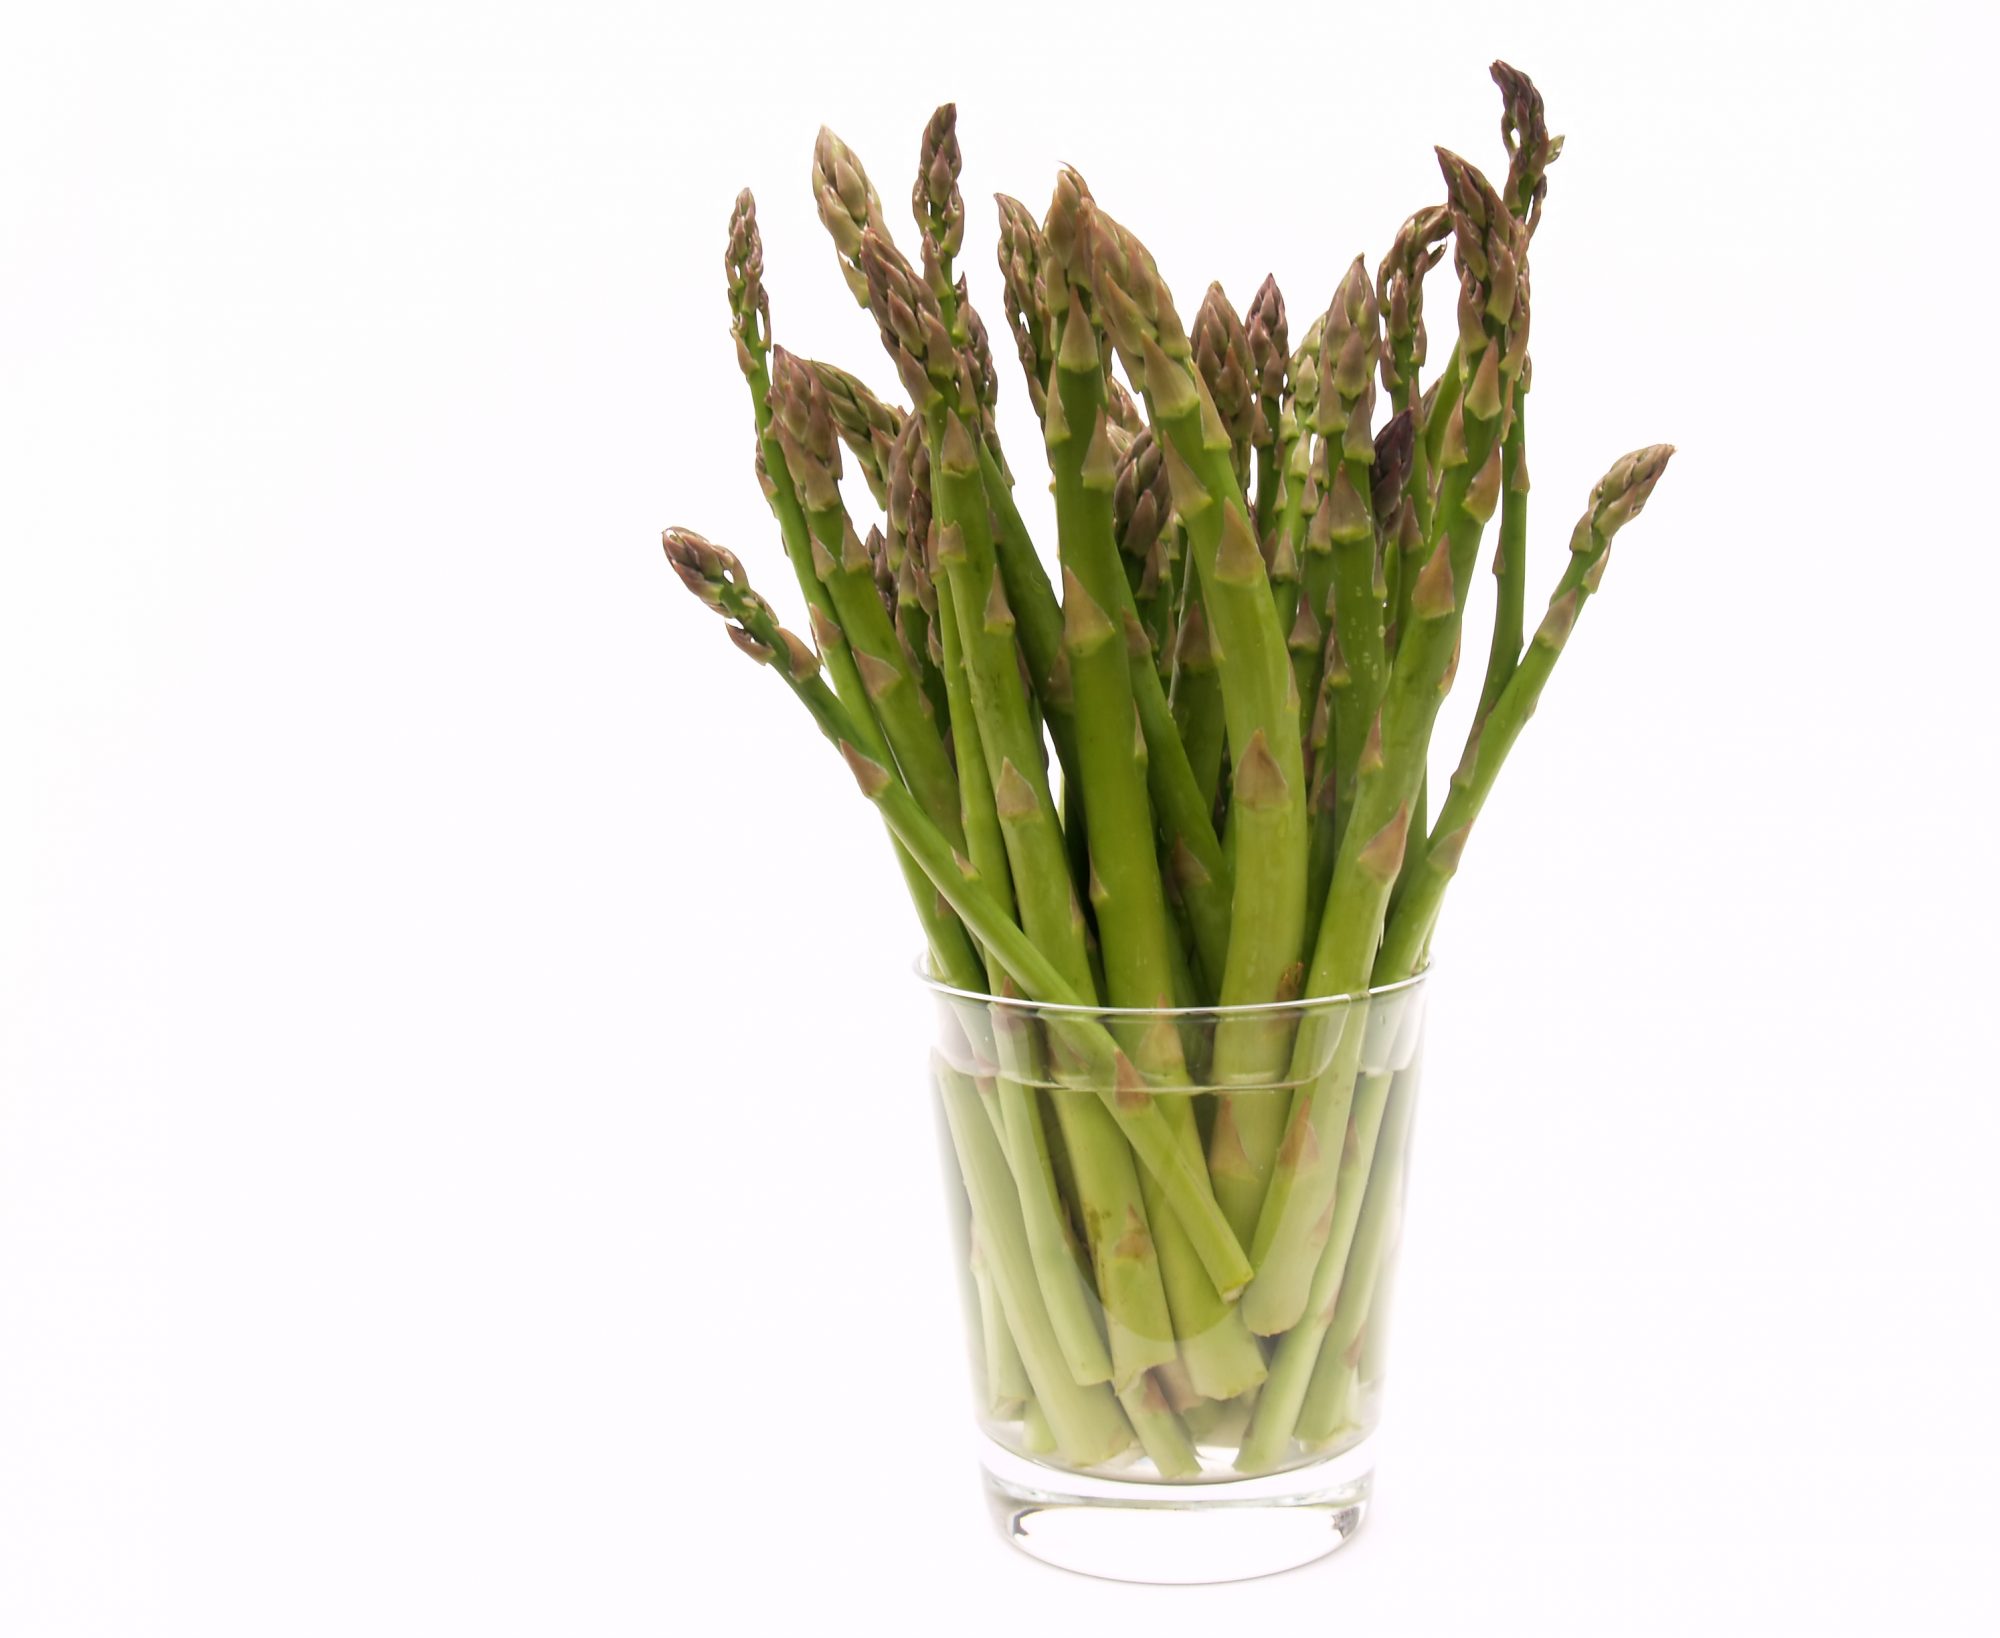 Asparagus In Water Getty 4/22/20